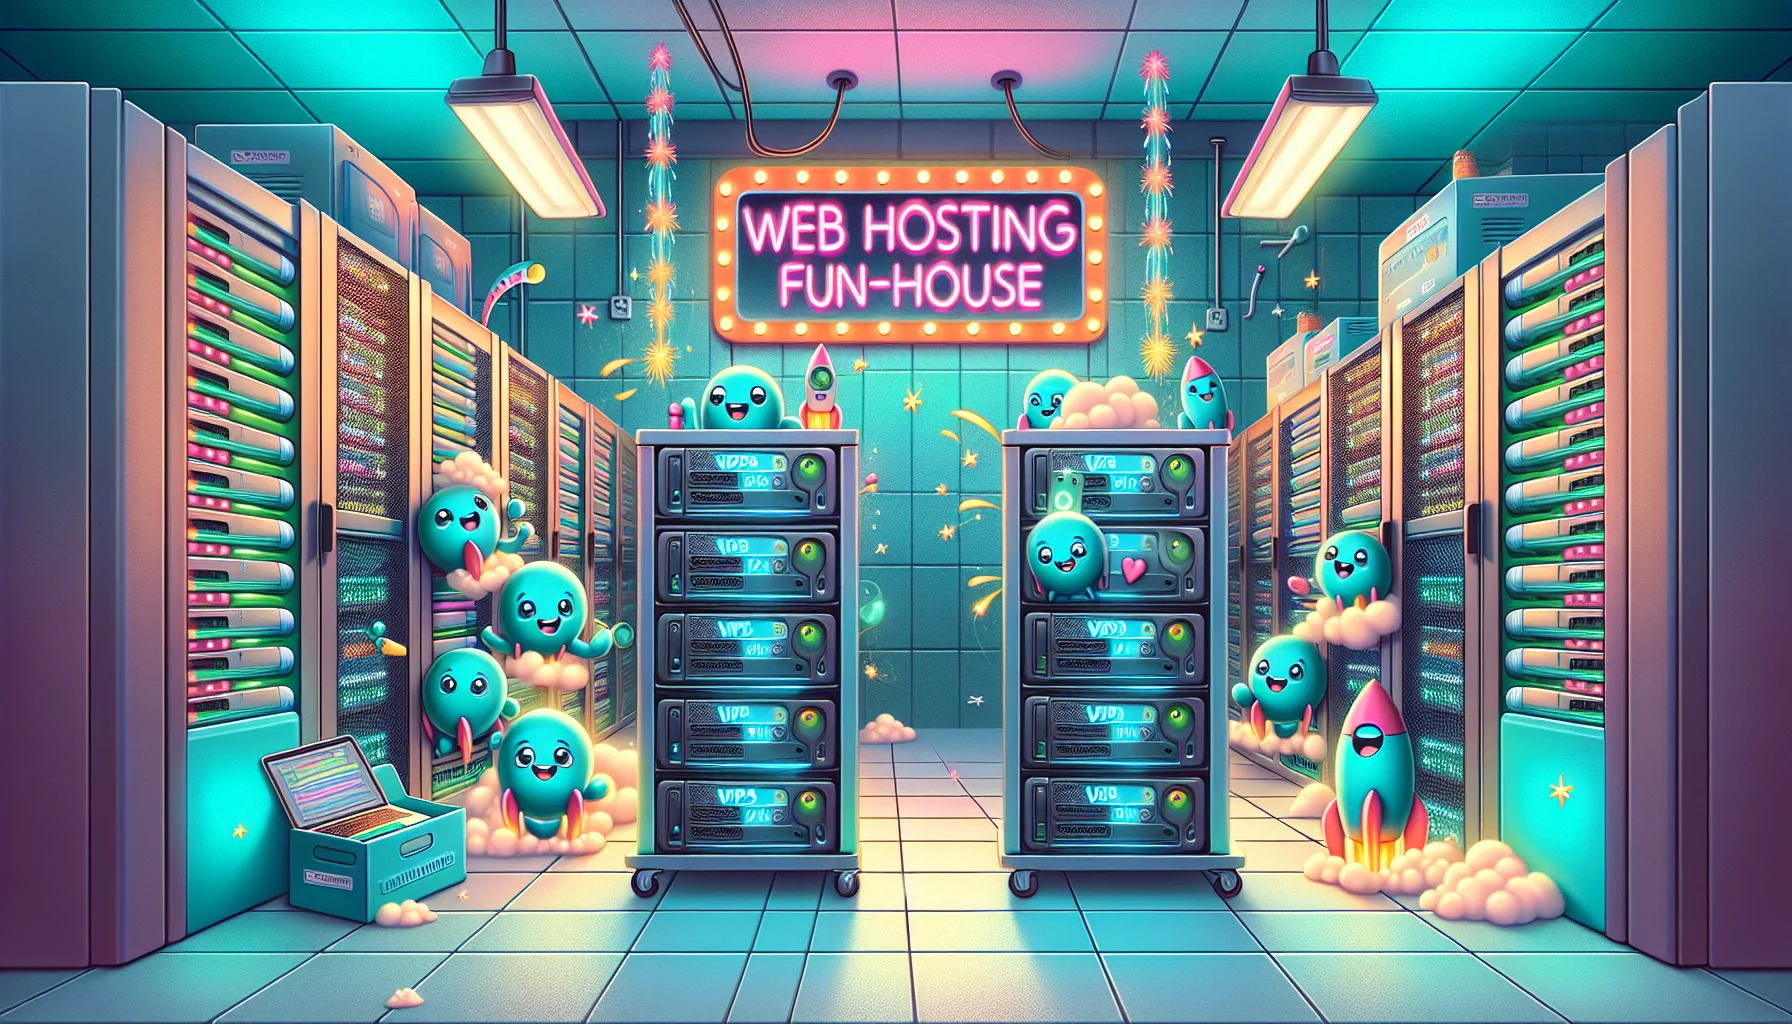 Create a whimsical image showcasing a series of small, efficient computers arranged on shelves within a server room. These machines are labeled, 'VPS Hosting India'. Paint the room in a color palette vibrant with turquoises and pinks. The computers are animated anthropomorphically with grinning faces and arms opening to welcome users. Burst of sparkles and mini rockets shooting off from the servers signify the high speed and efficiency of the service. Above the server rack, a neon sign that reads 'Web Hosting Fun-house' glows energetically. 